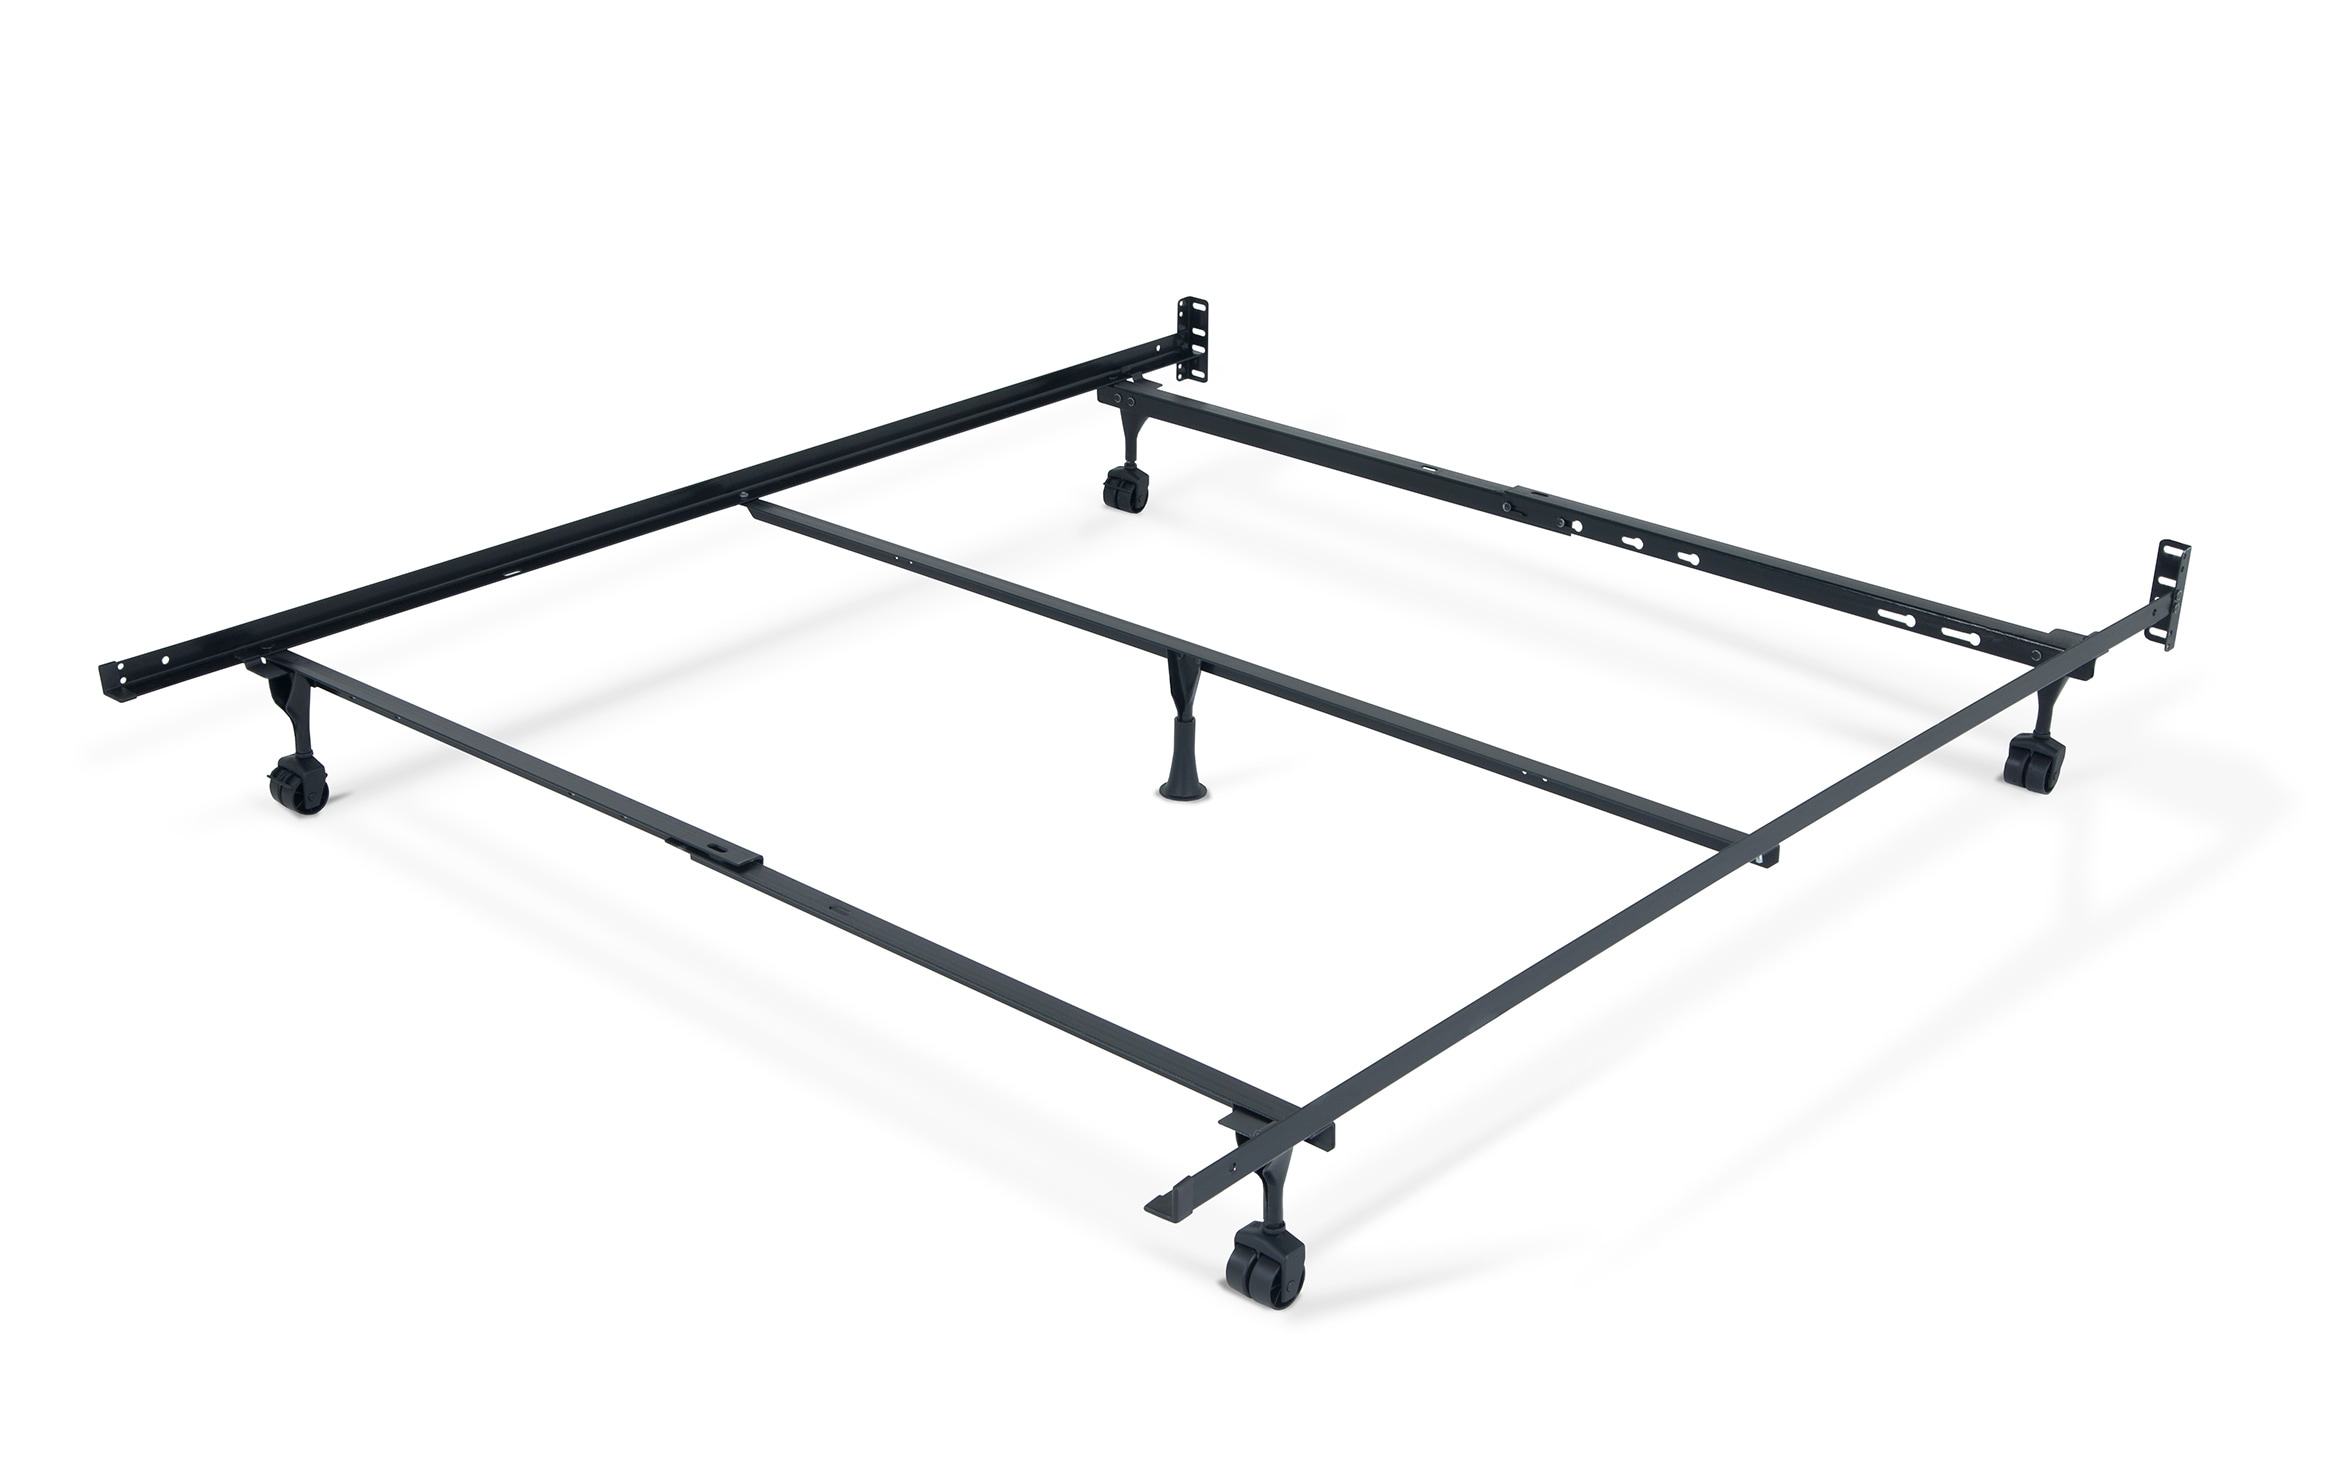 Queen King California Bed Frame, Metal Bed Frame With Casters